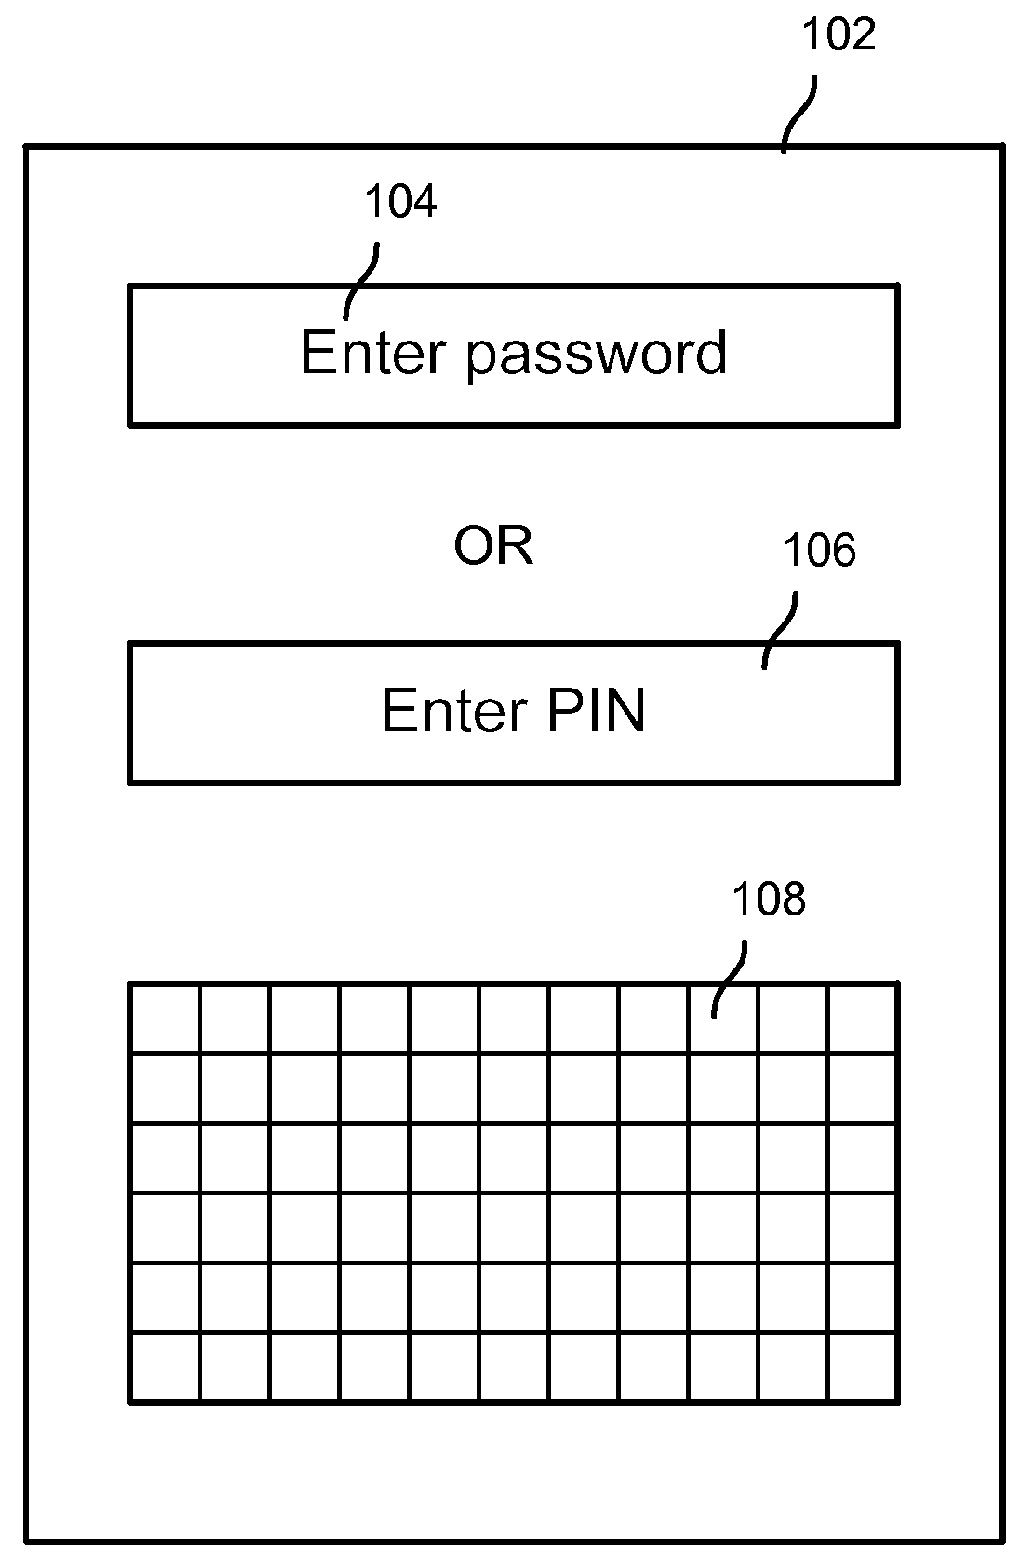 Secure identification string